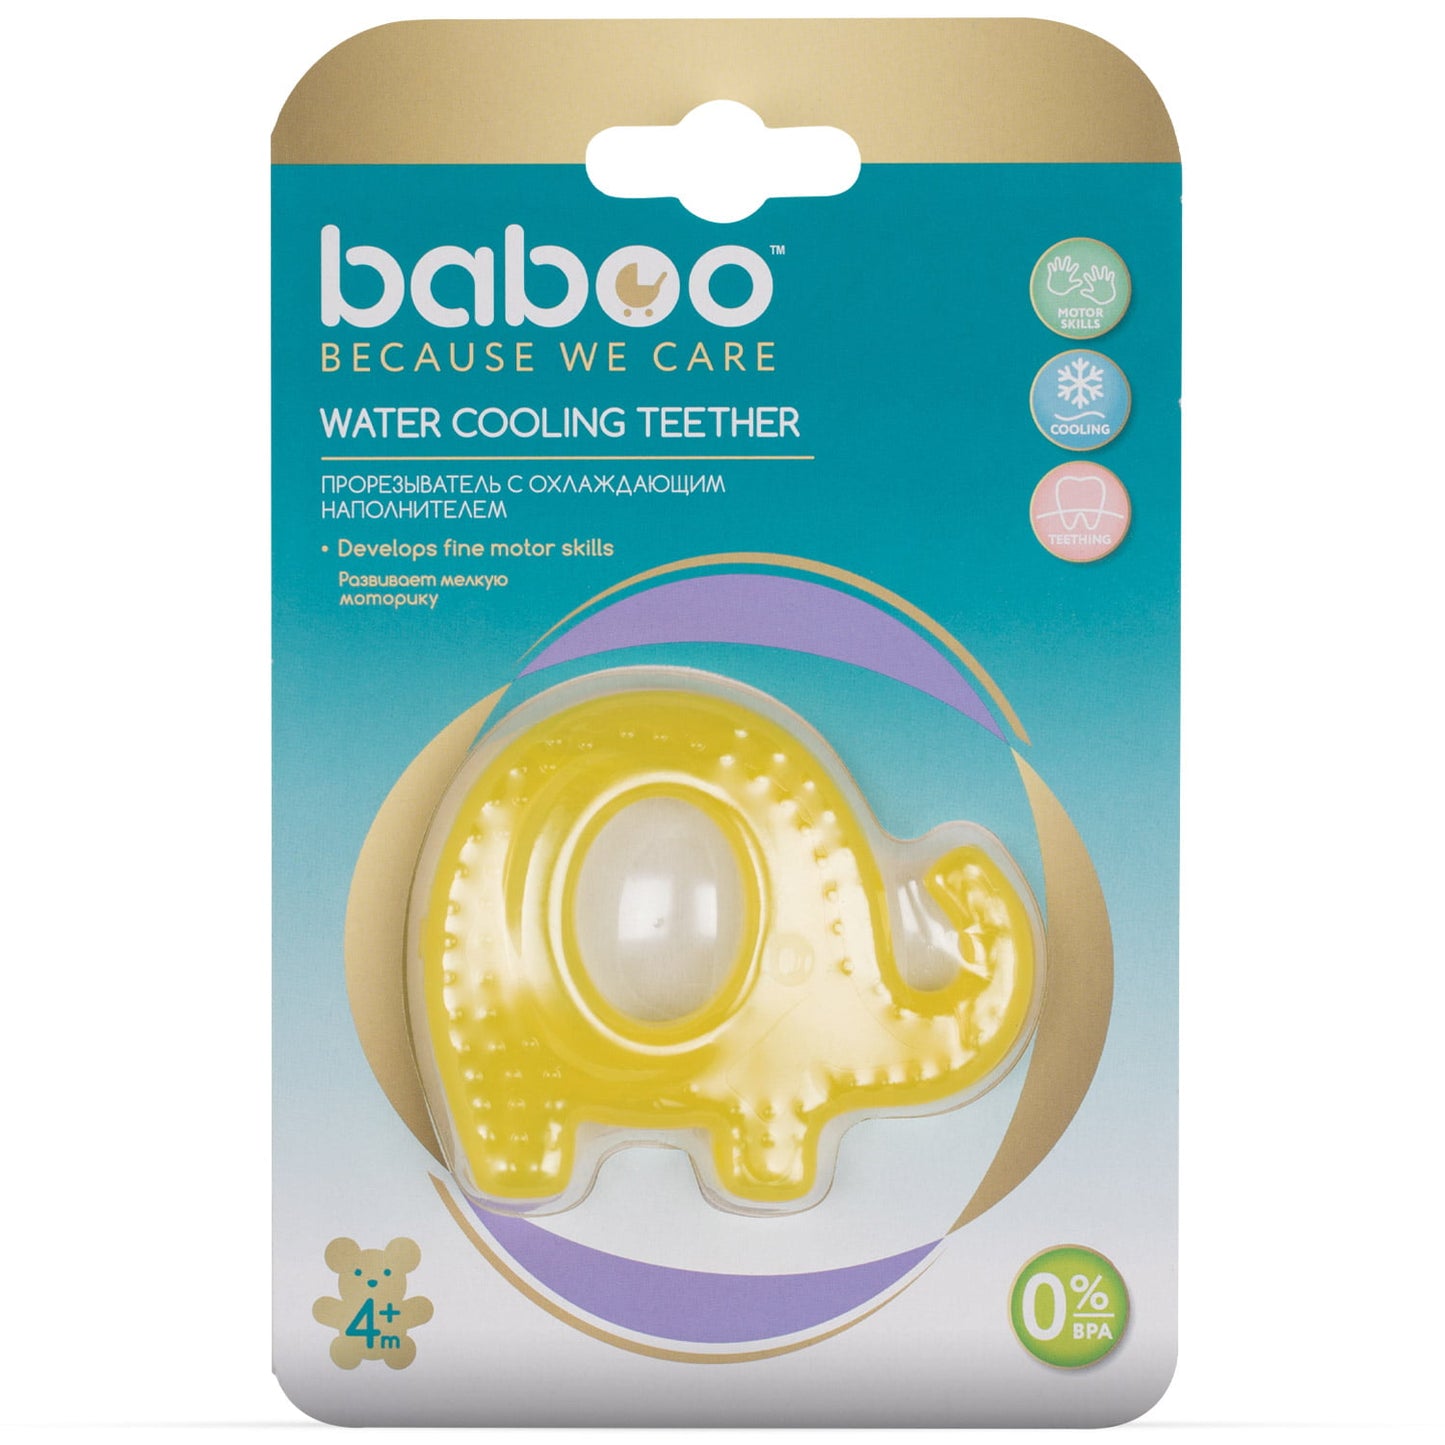 The Baboo Teether Waterfilled Elephant Yellow 4+ is a safe and hygienic way to soothe your baby. Its soft, water-filled center provides gentle, durable relief for your baby's teething pain. With its yellow elephant design, this teether is sure to delight your little one.